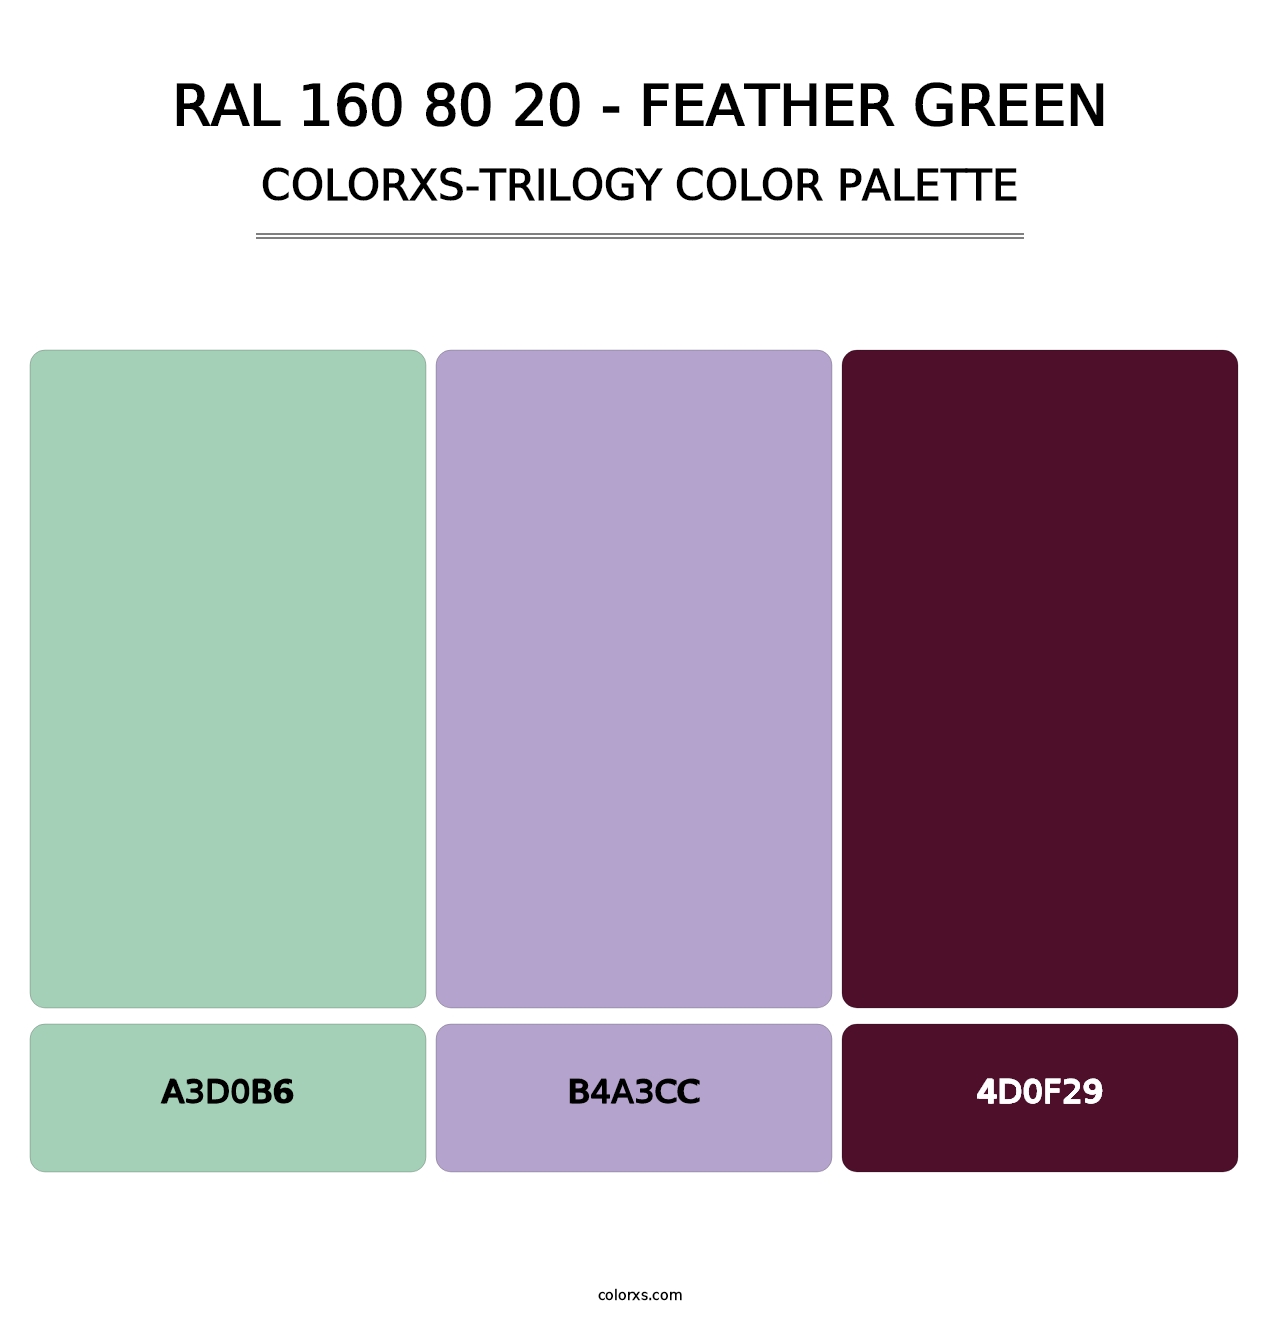 RAL 160 80 20 - Feather Green - Colorxs Trilogy Palette